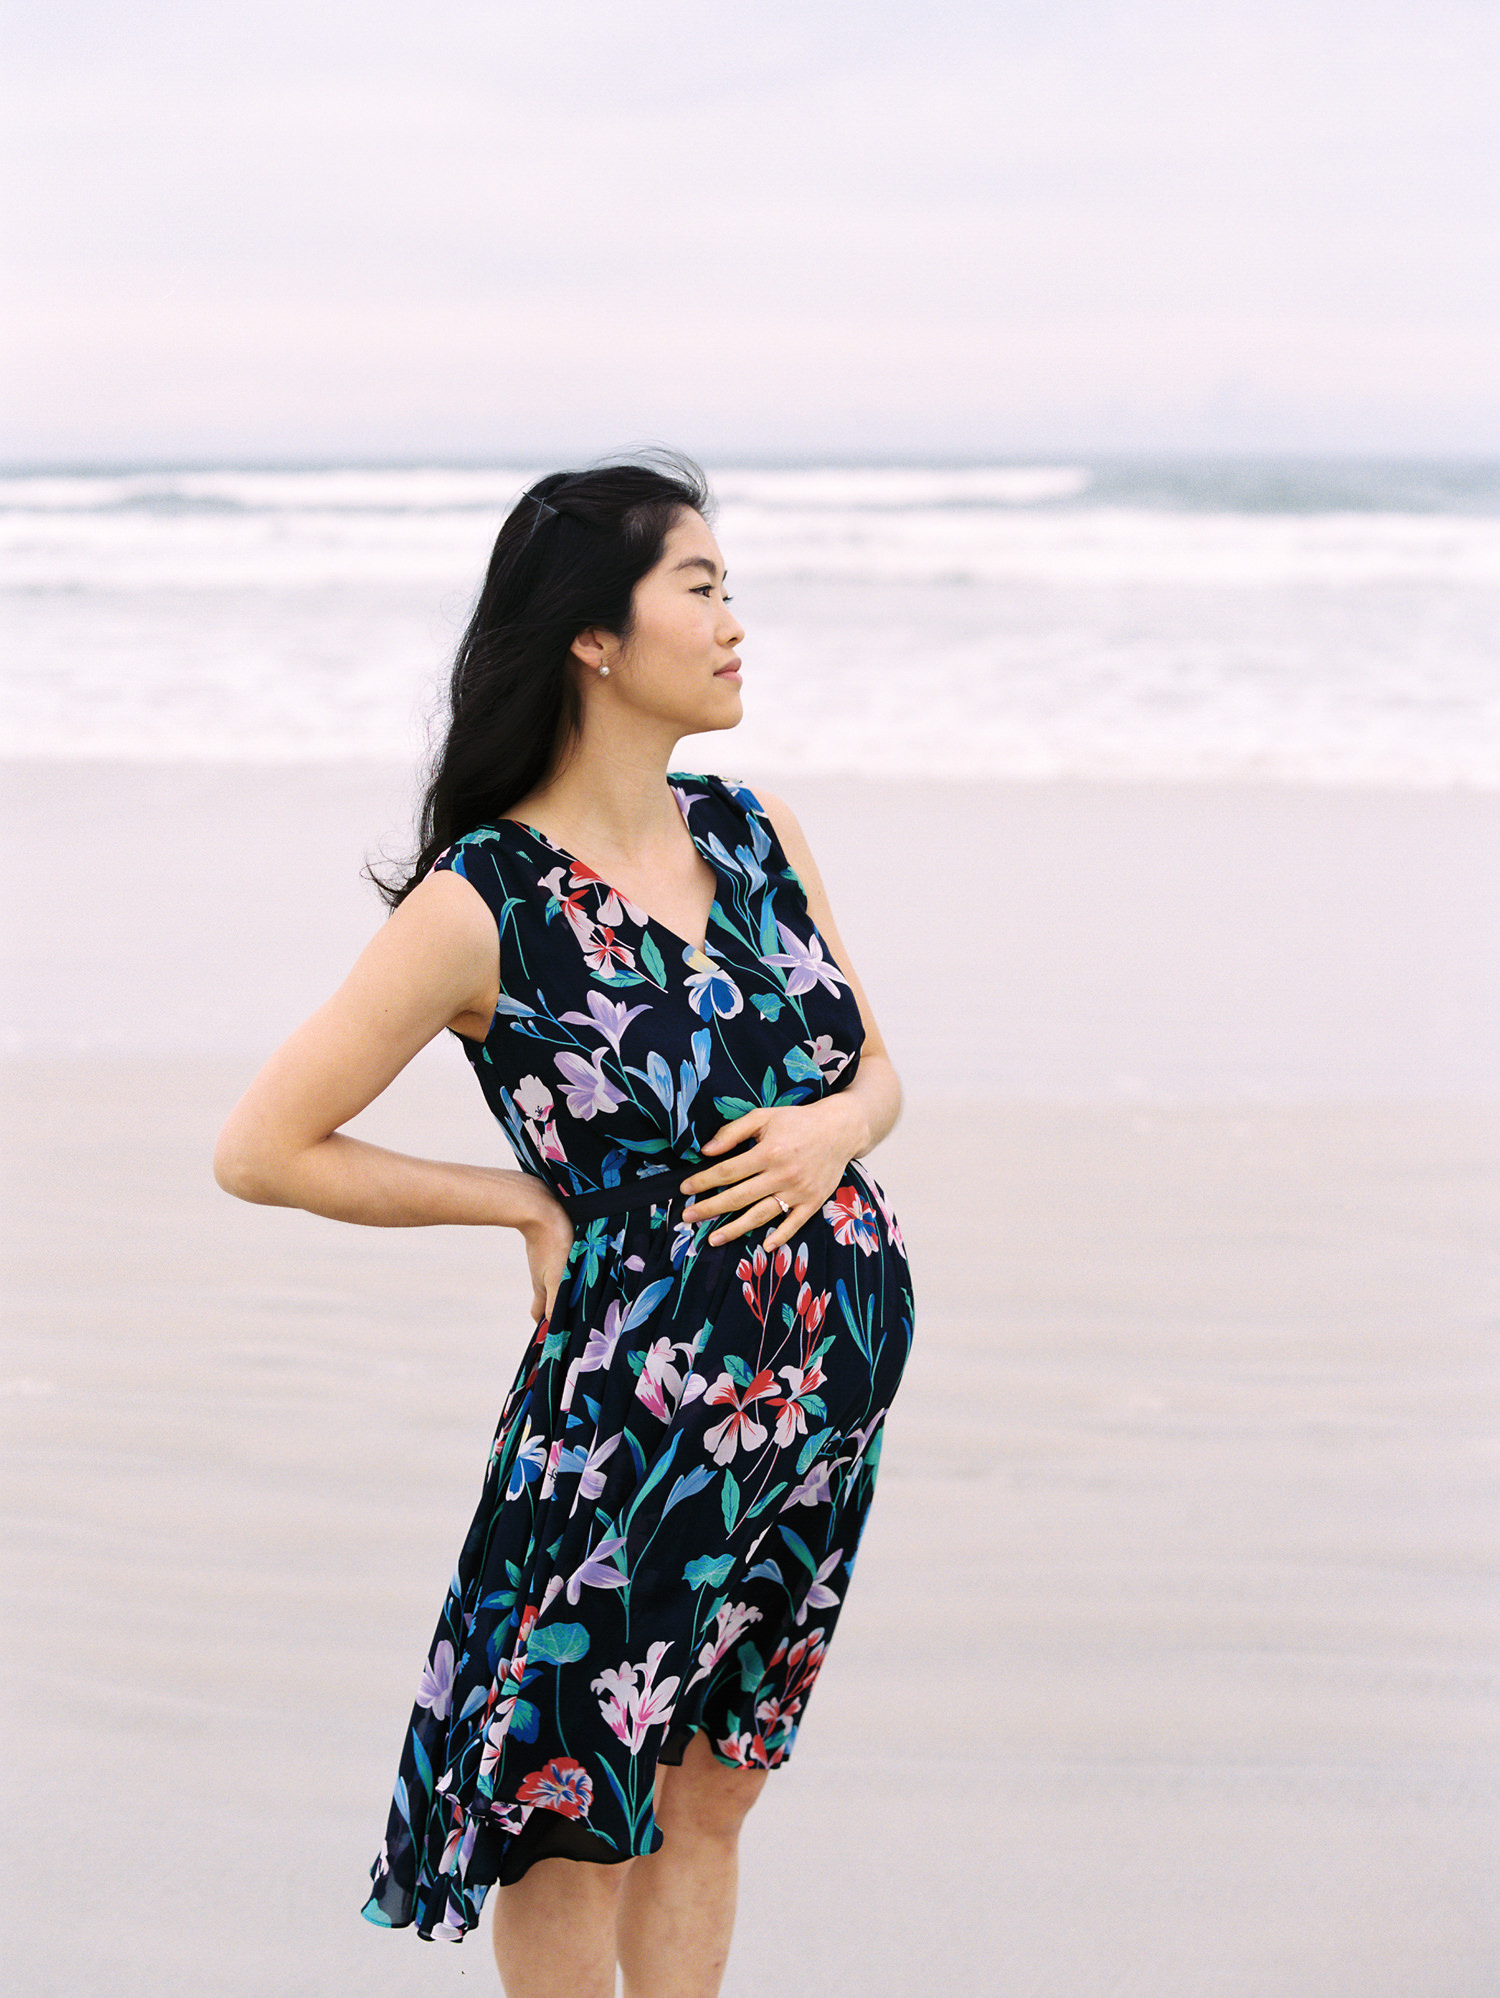 a pregnant korean woman standing on the beach with one hand on her back and the other resting on her pregnant belly during maternity photoshoot